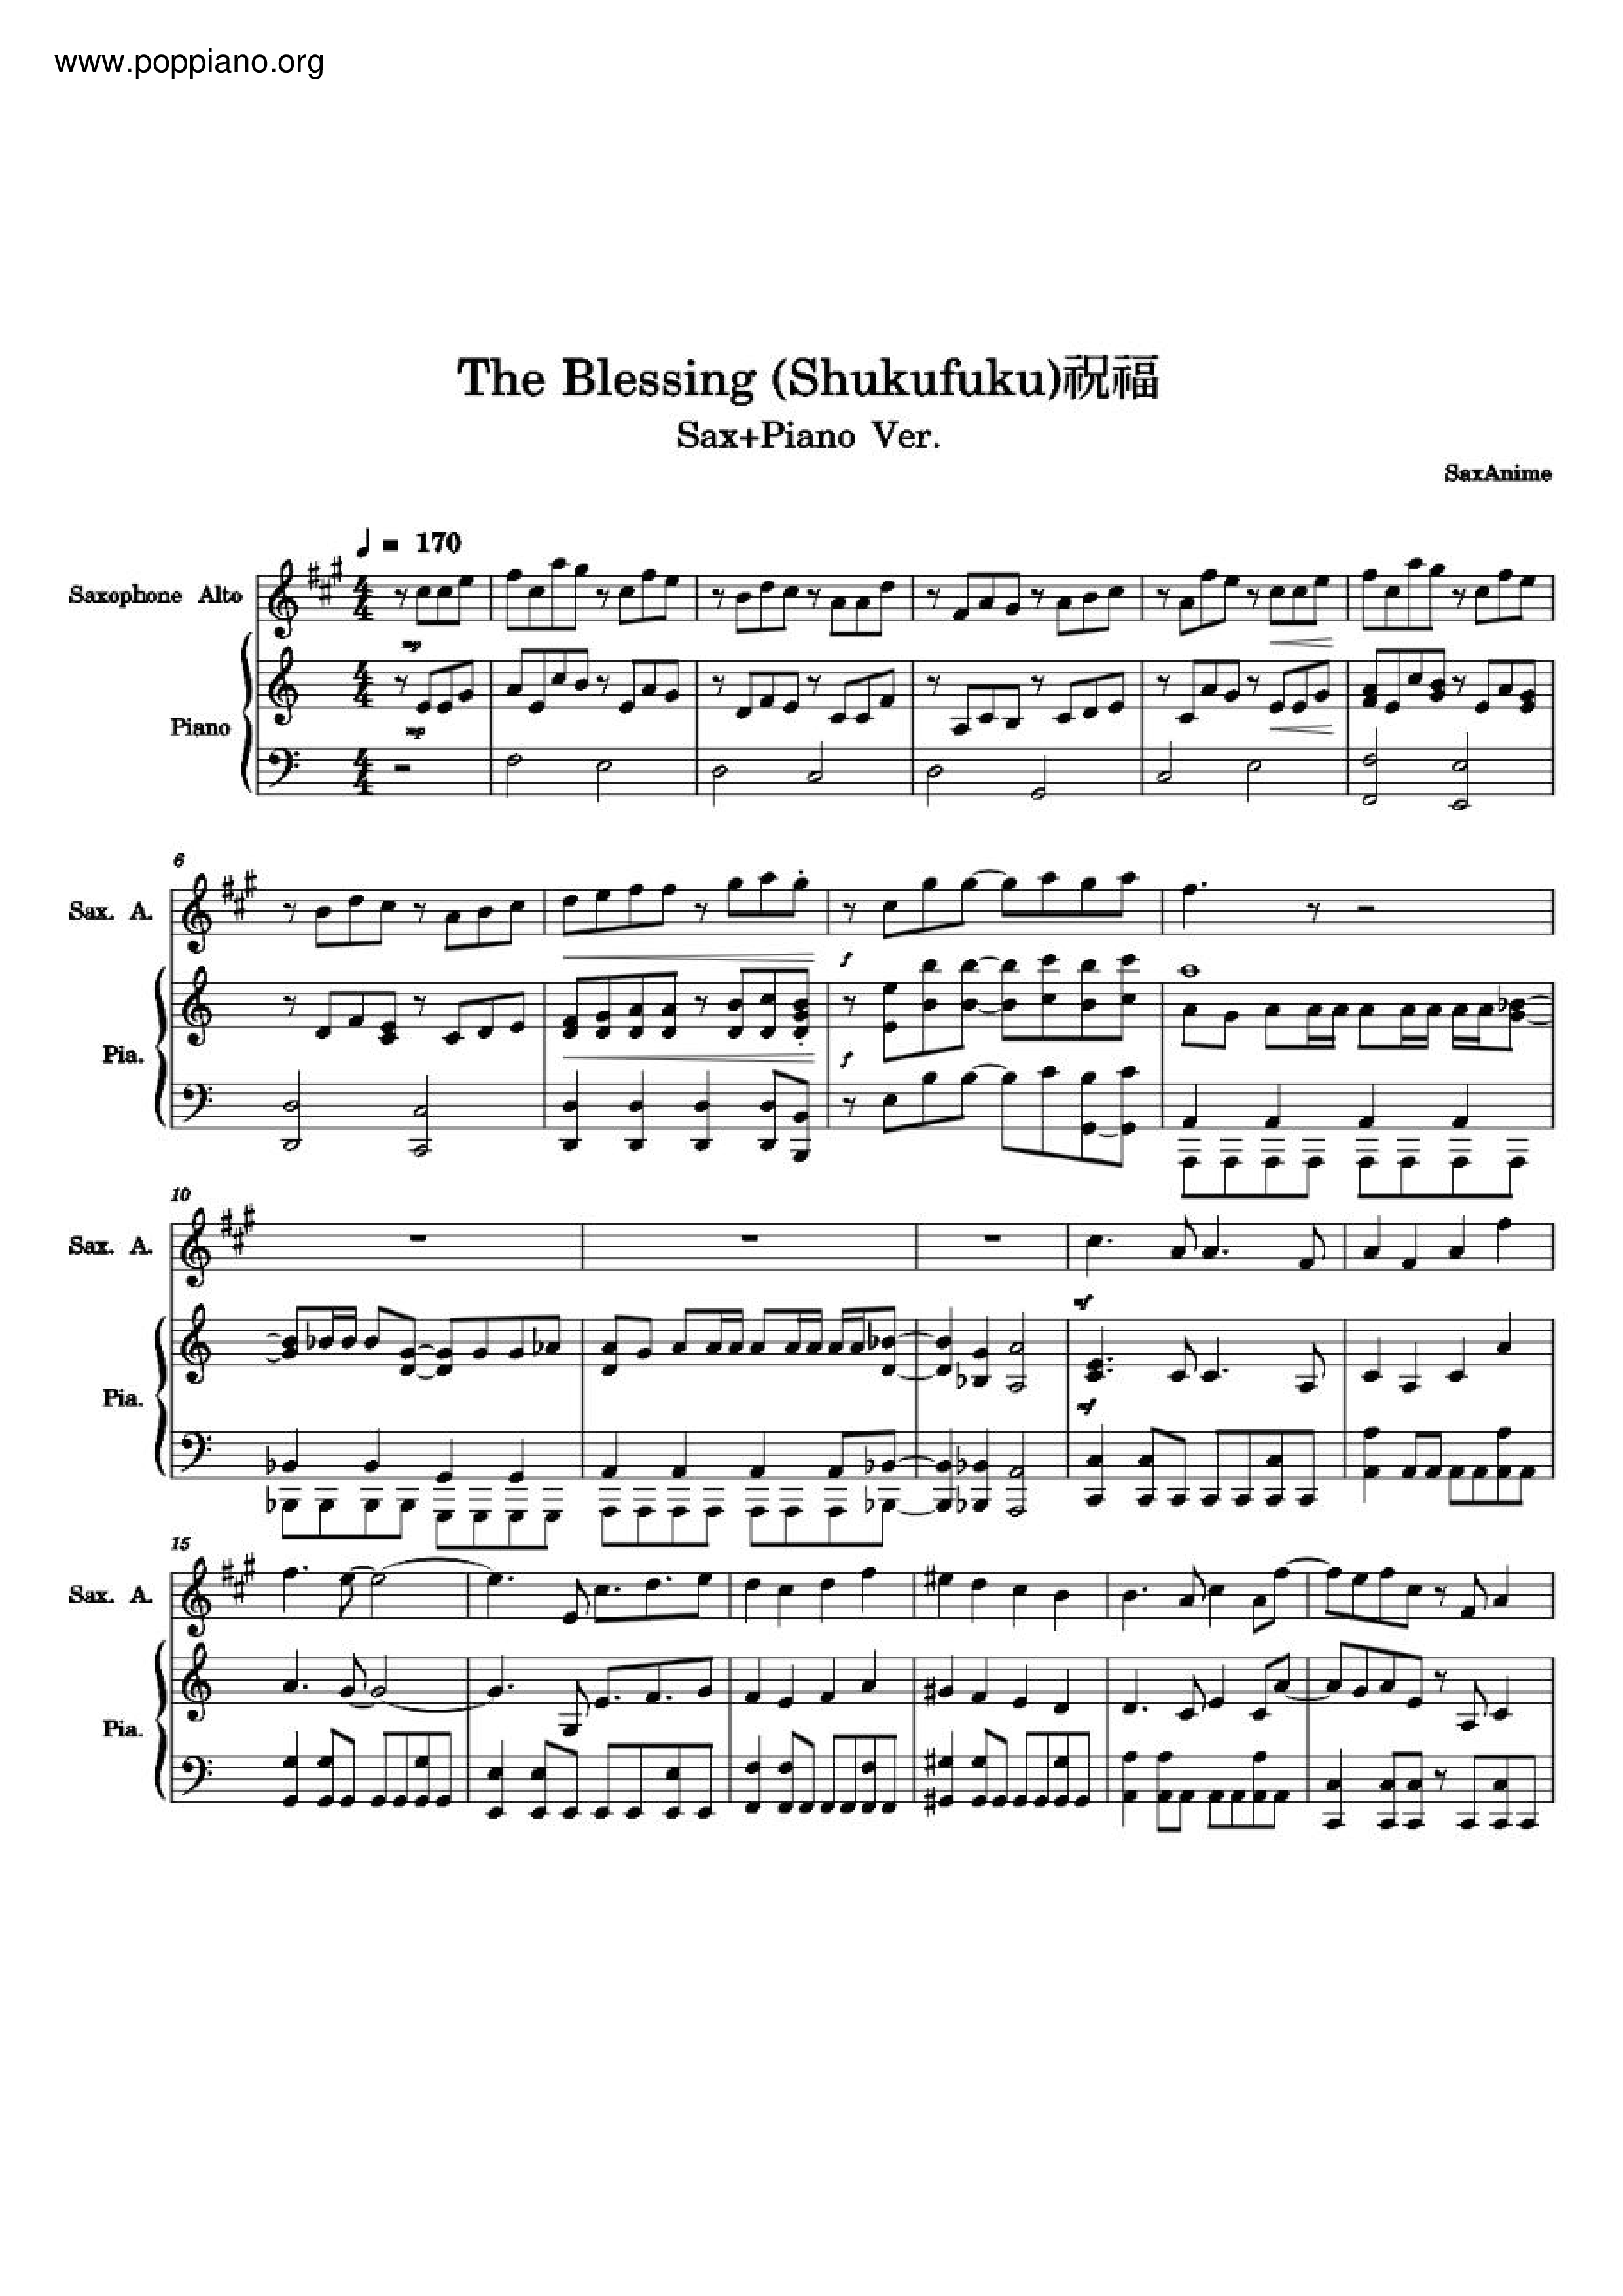 The Blessing Score